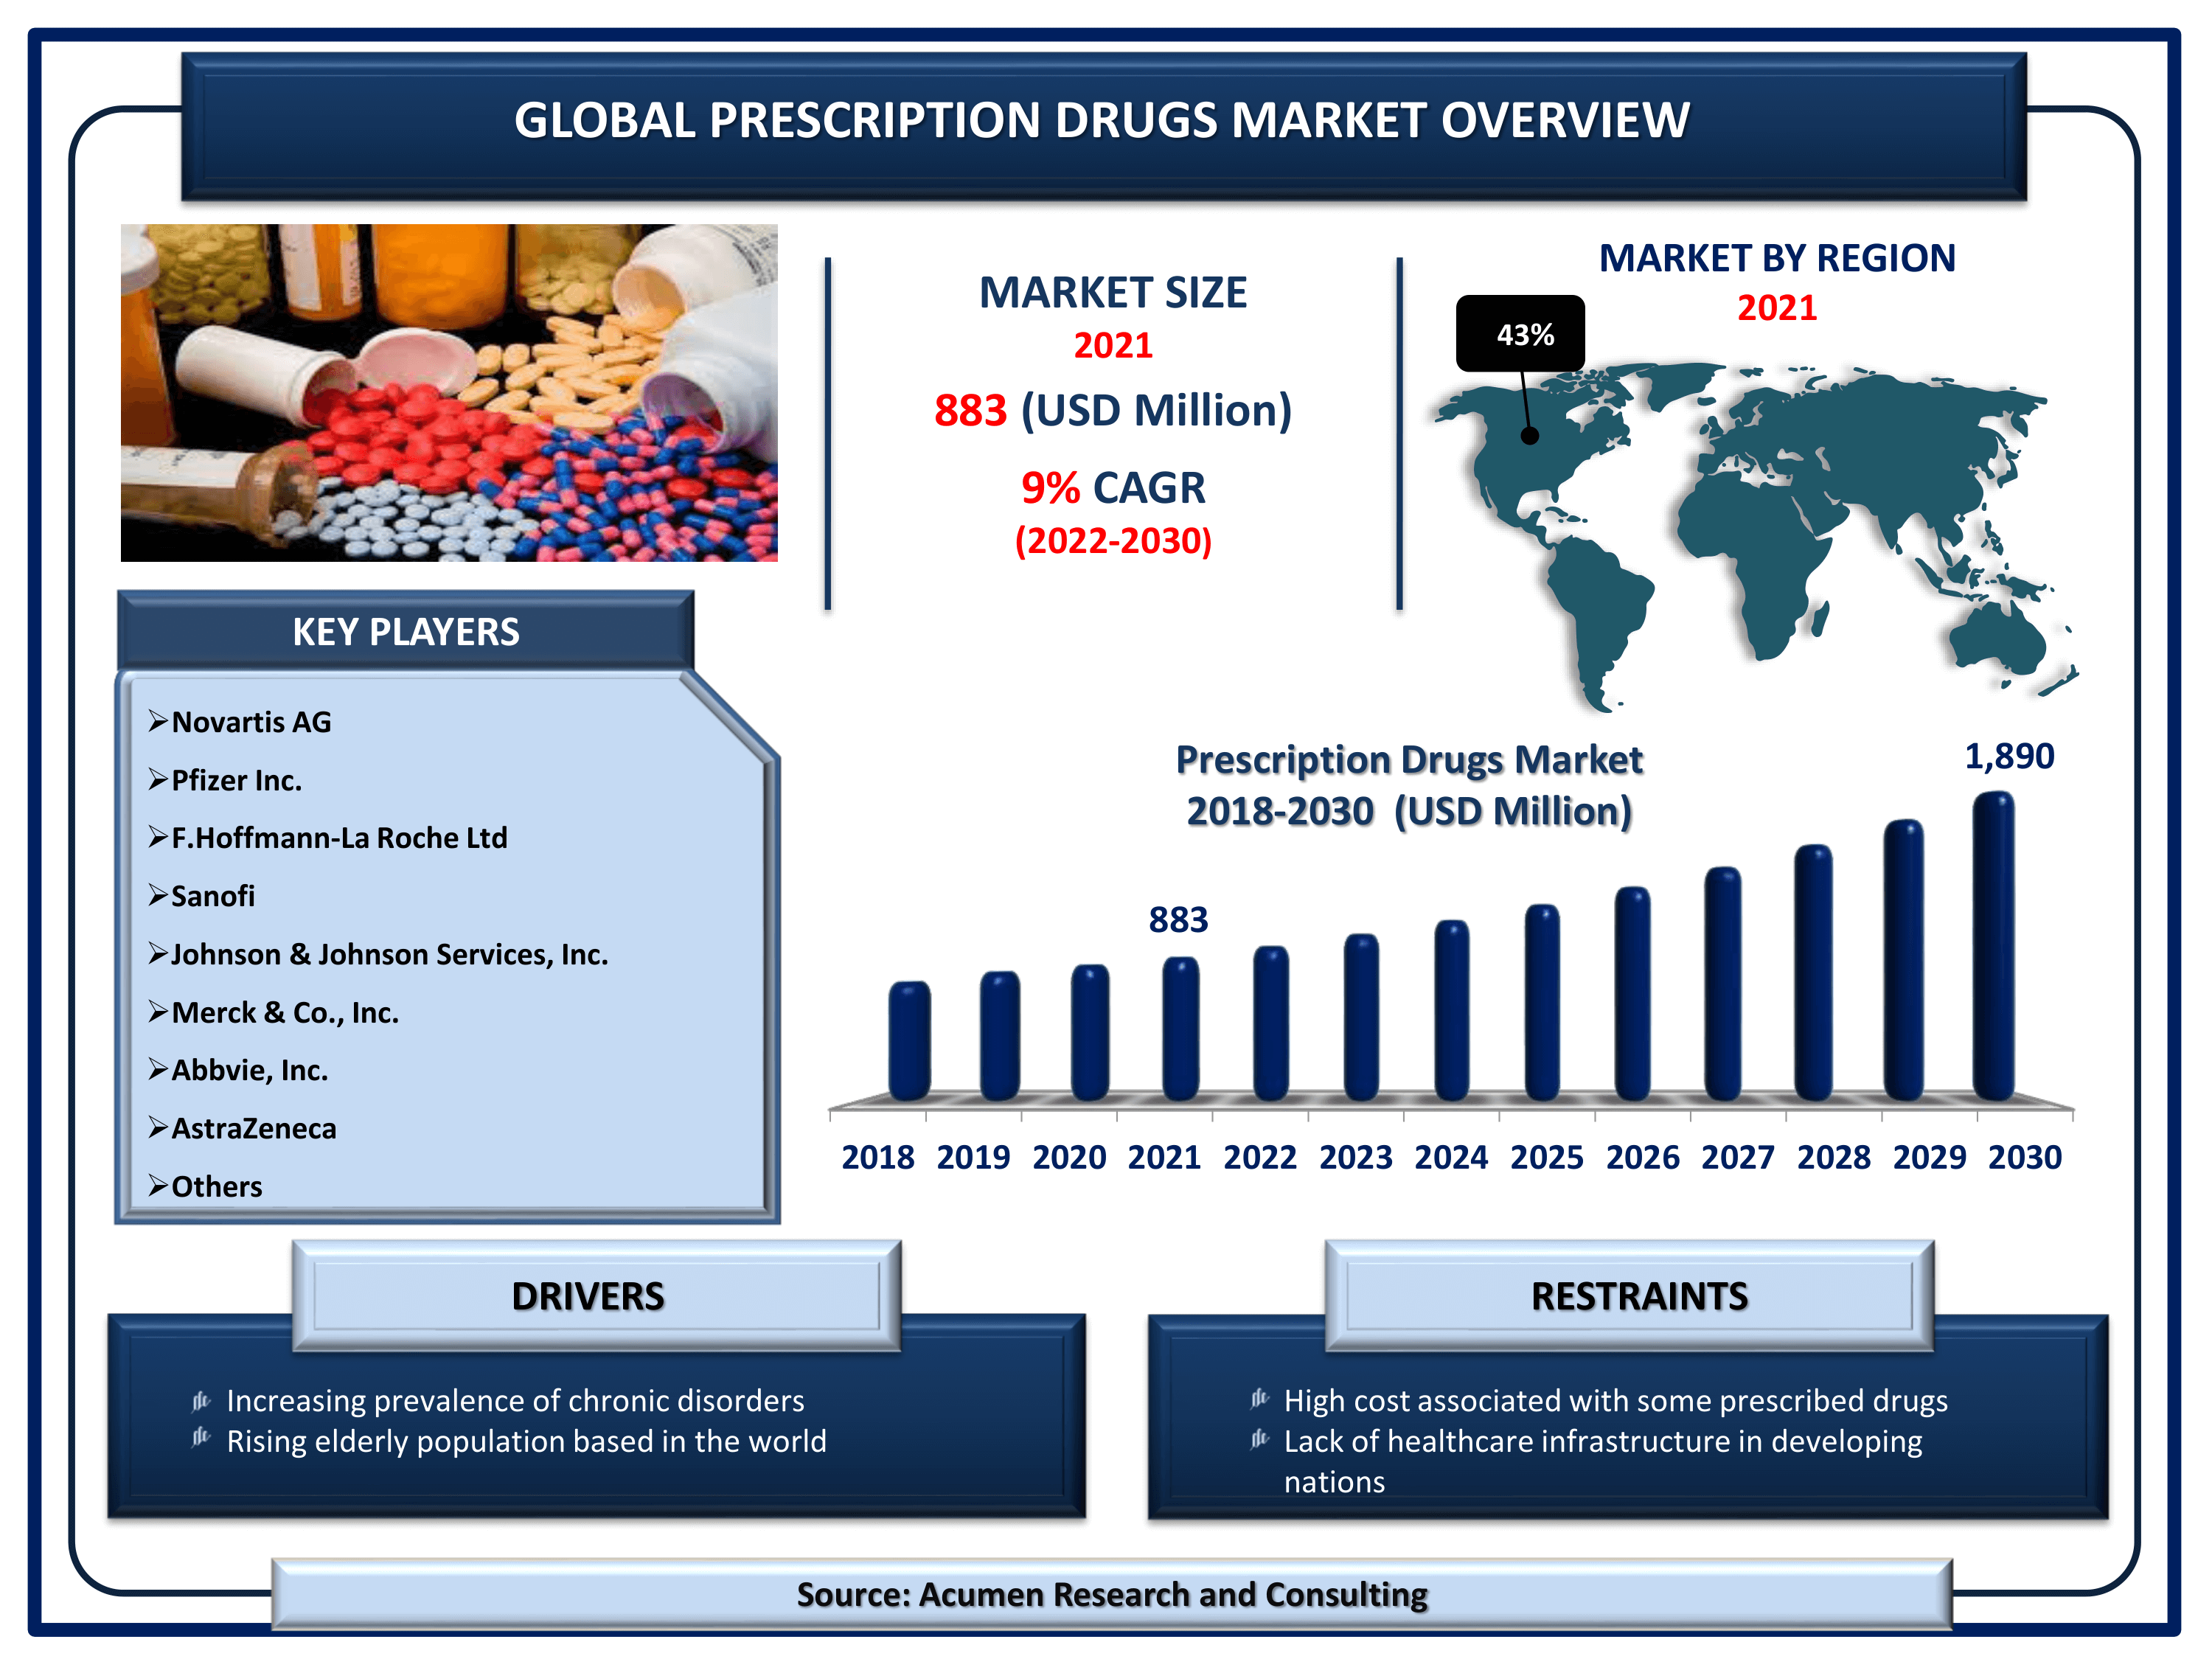 Global prescription drugs market revenue is estimated to reach USD 1,890 Million by 2030 with a CAGR of 9% from 2022 to 2030